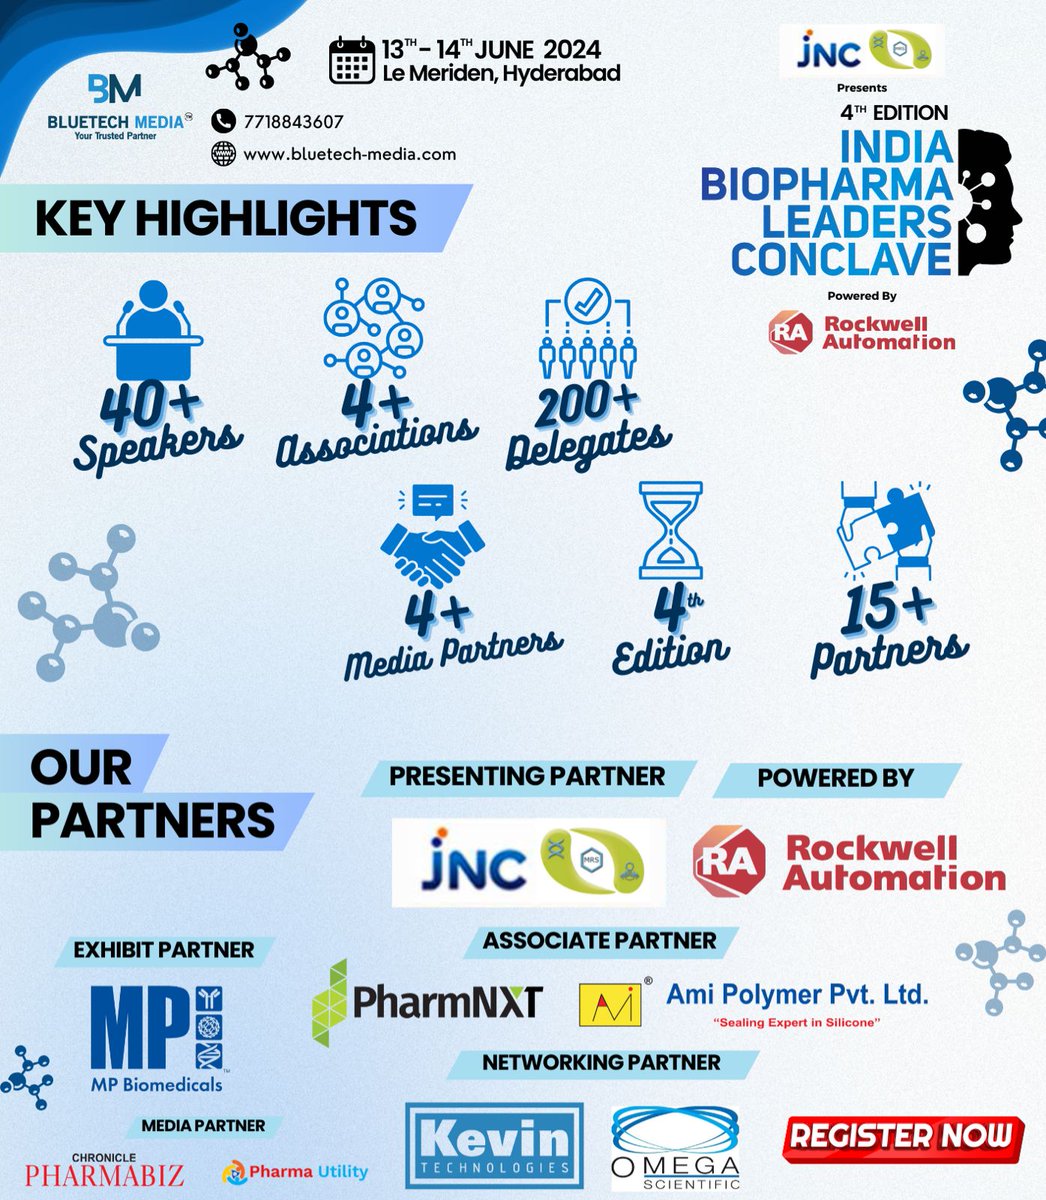 Discover the event's pivotal moments and our esteemed partners!
Secure your spot now for the 4th Edition of the India Biopharma Leaders Conclave, proudly presented by M R Sanghavi & Co., powered by Rockwell Automation, and hosted by BlueTech Media™.
click lnkd.in/d2T9iruW